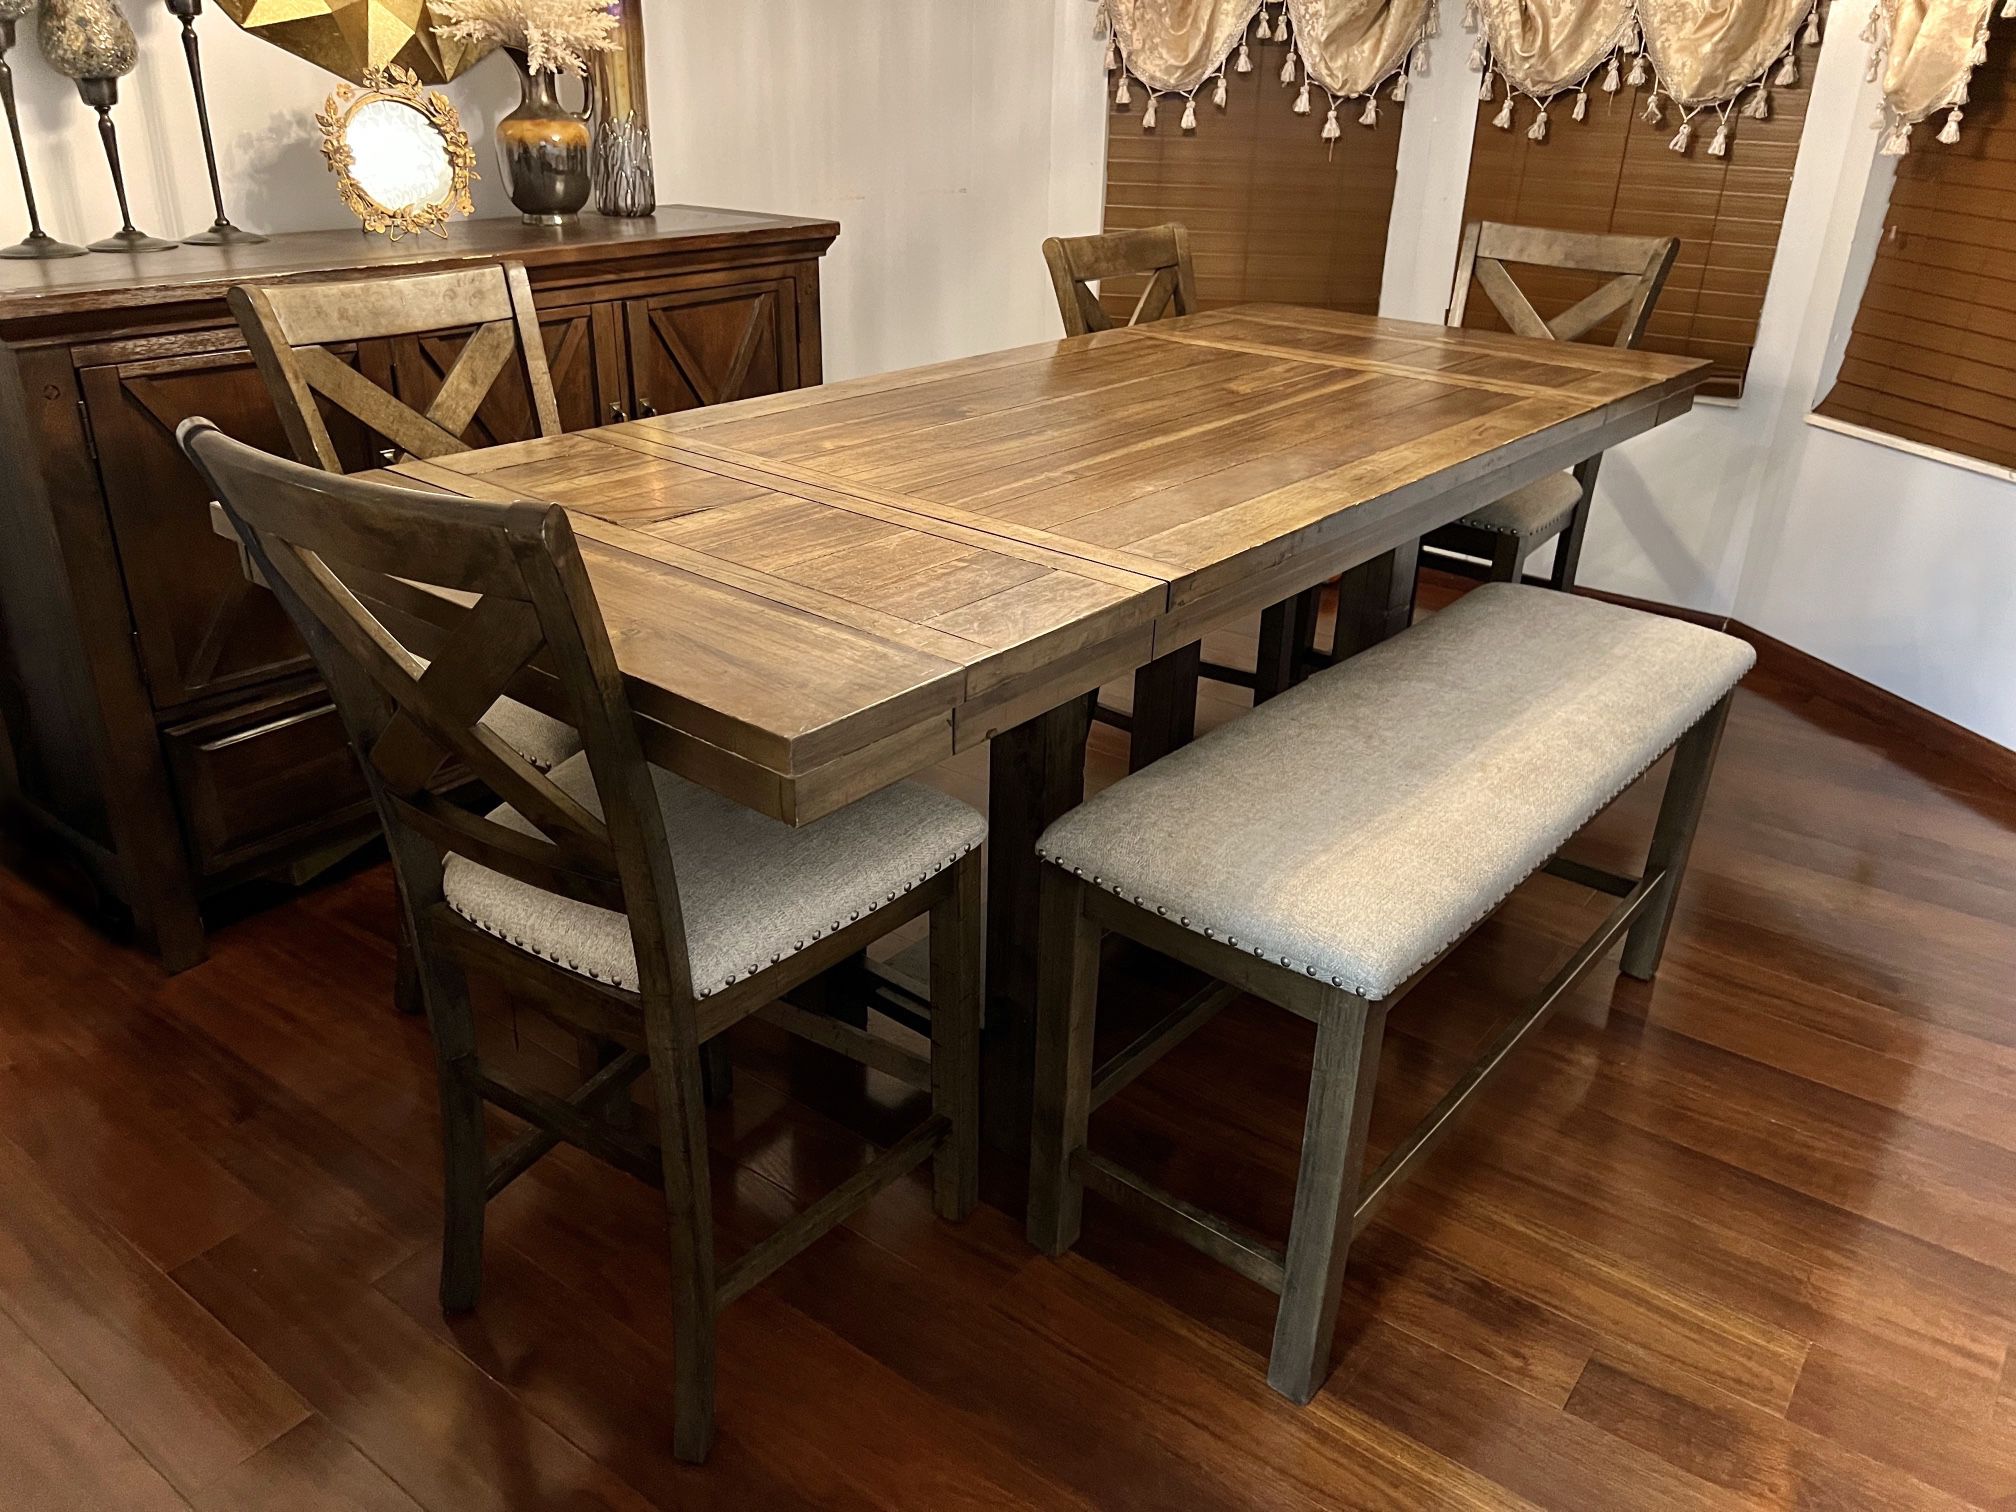 6 Pieces Dining table Set, Wooden Table and 4 Chairs With Bench With Cushion